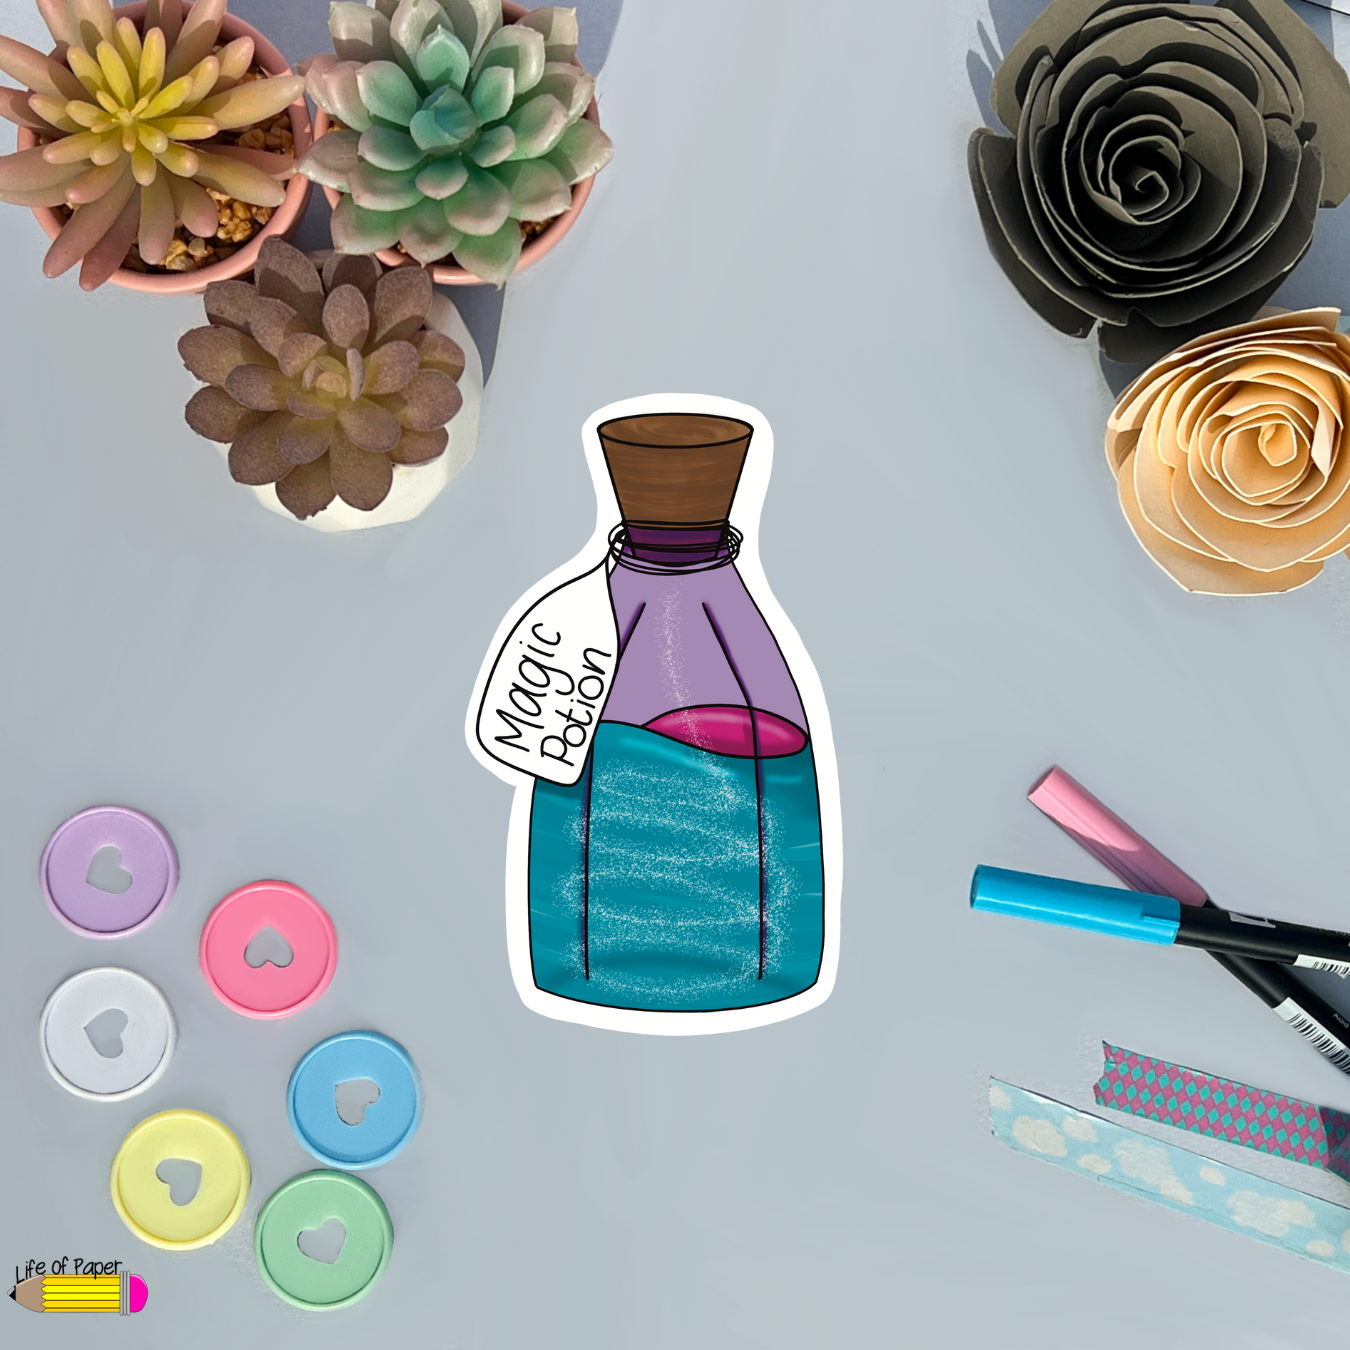 A Magic Potion Vinyl Sticker is centered on a table. Surrounding the Magic Potion Vinyl Sticker are various items: colorful succulent plants, pastel buttons, pink and blue markers, and decorative paper roses. The strong matte vinyl adds an extra touch of durability and charm.